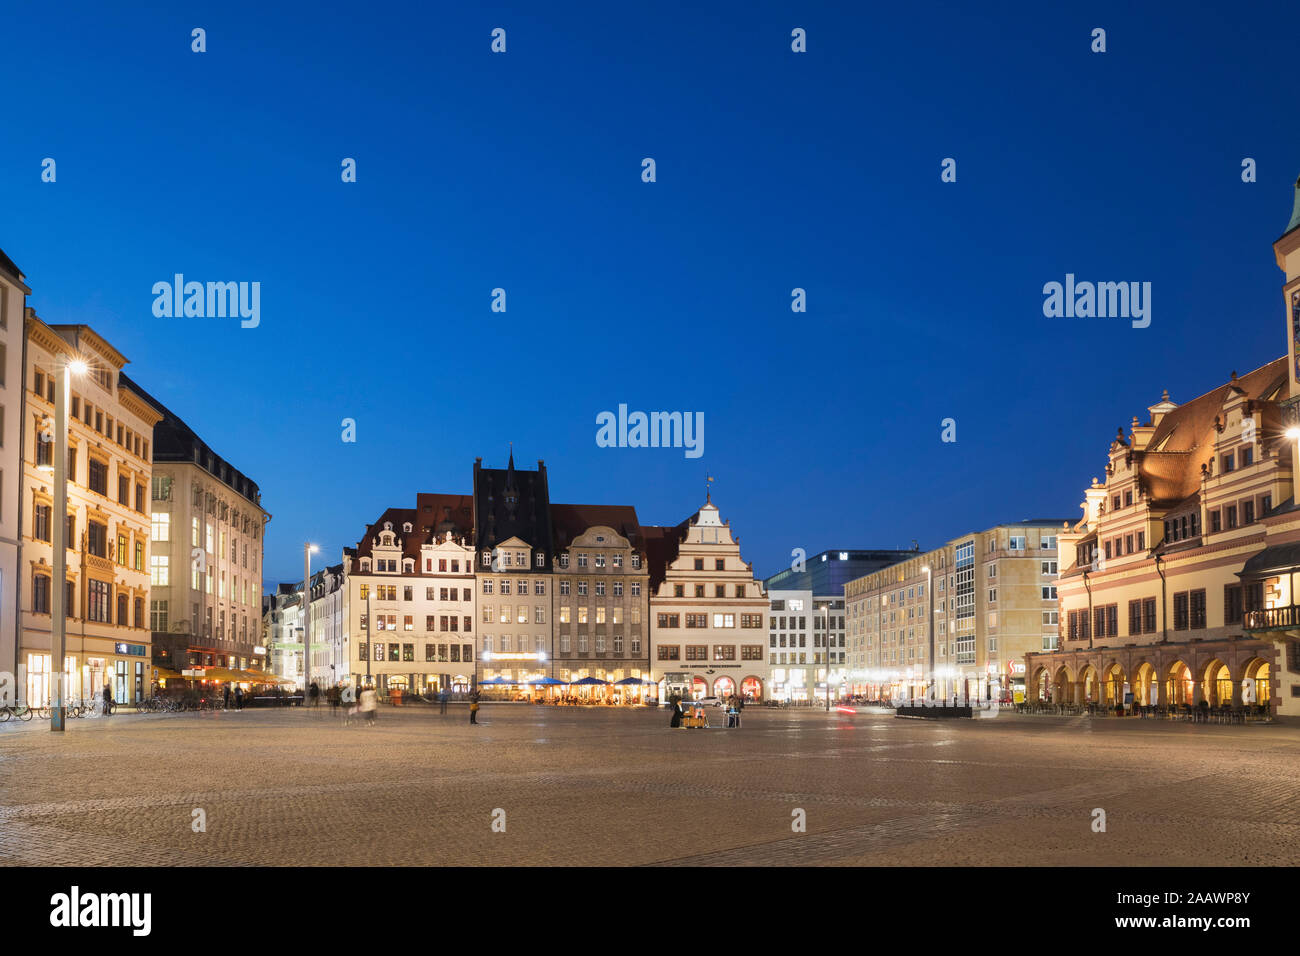 Town square amidst buildings against clear blue sky at night in Saxony, Germany Stock Photo